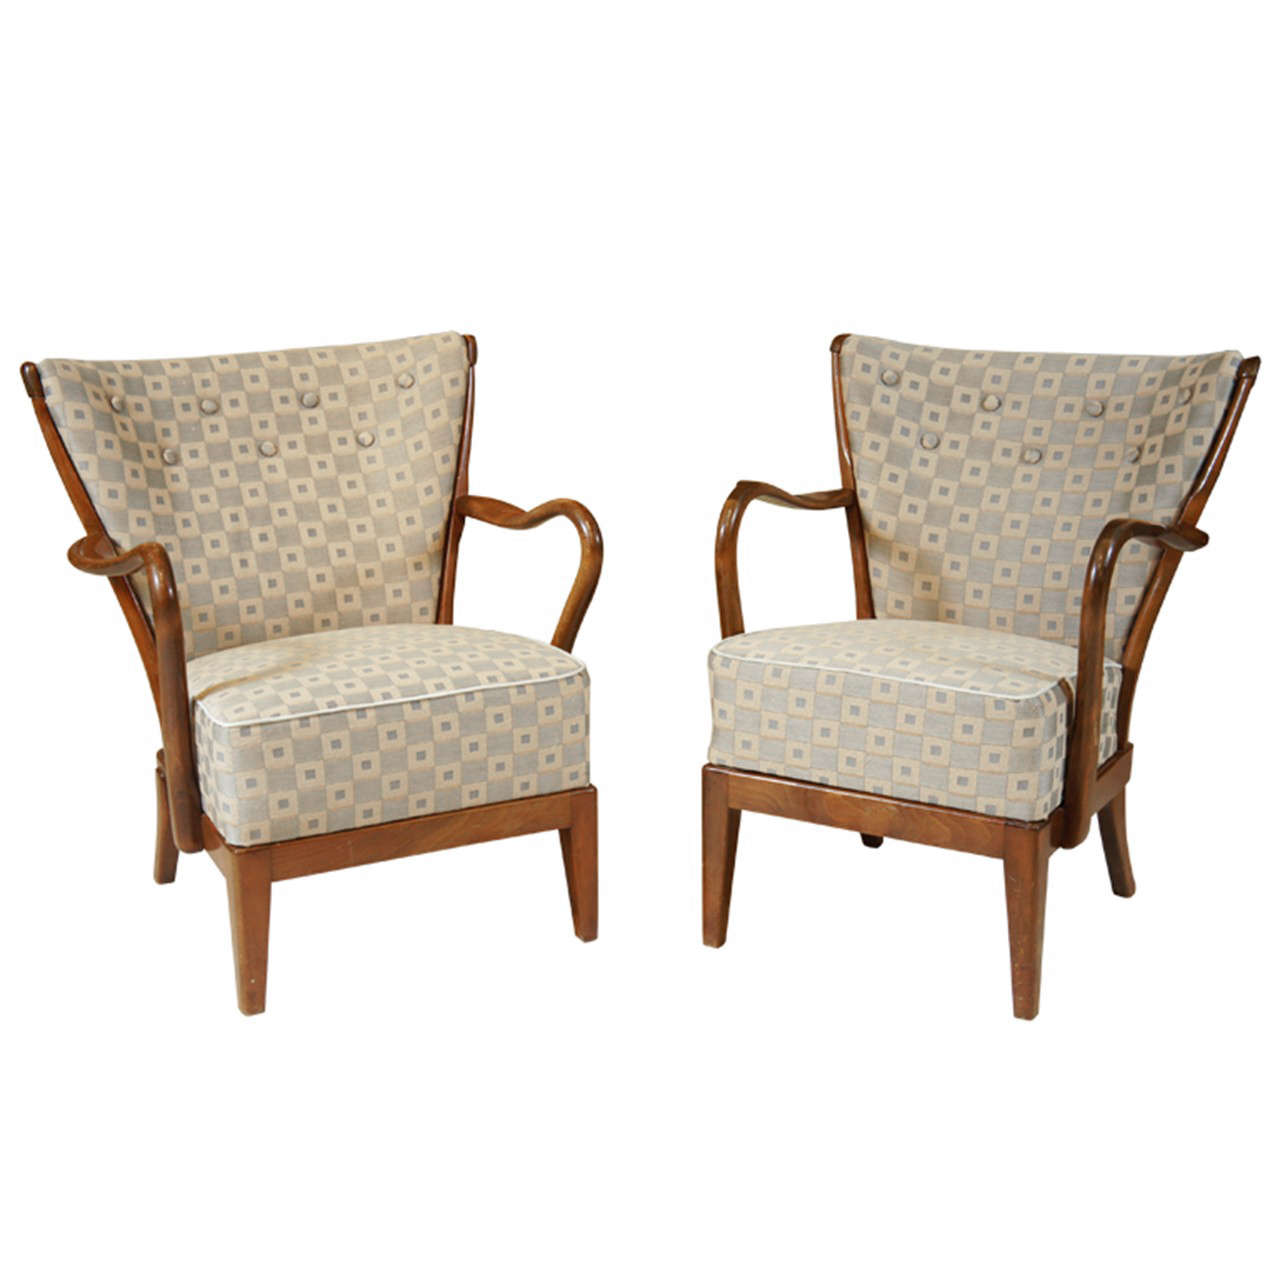 Lady's and Gent's Armchairs 